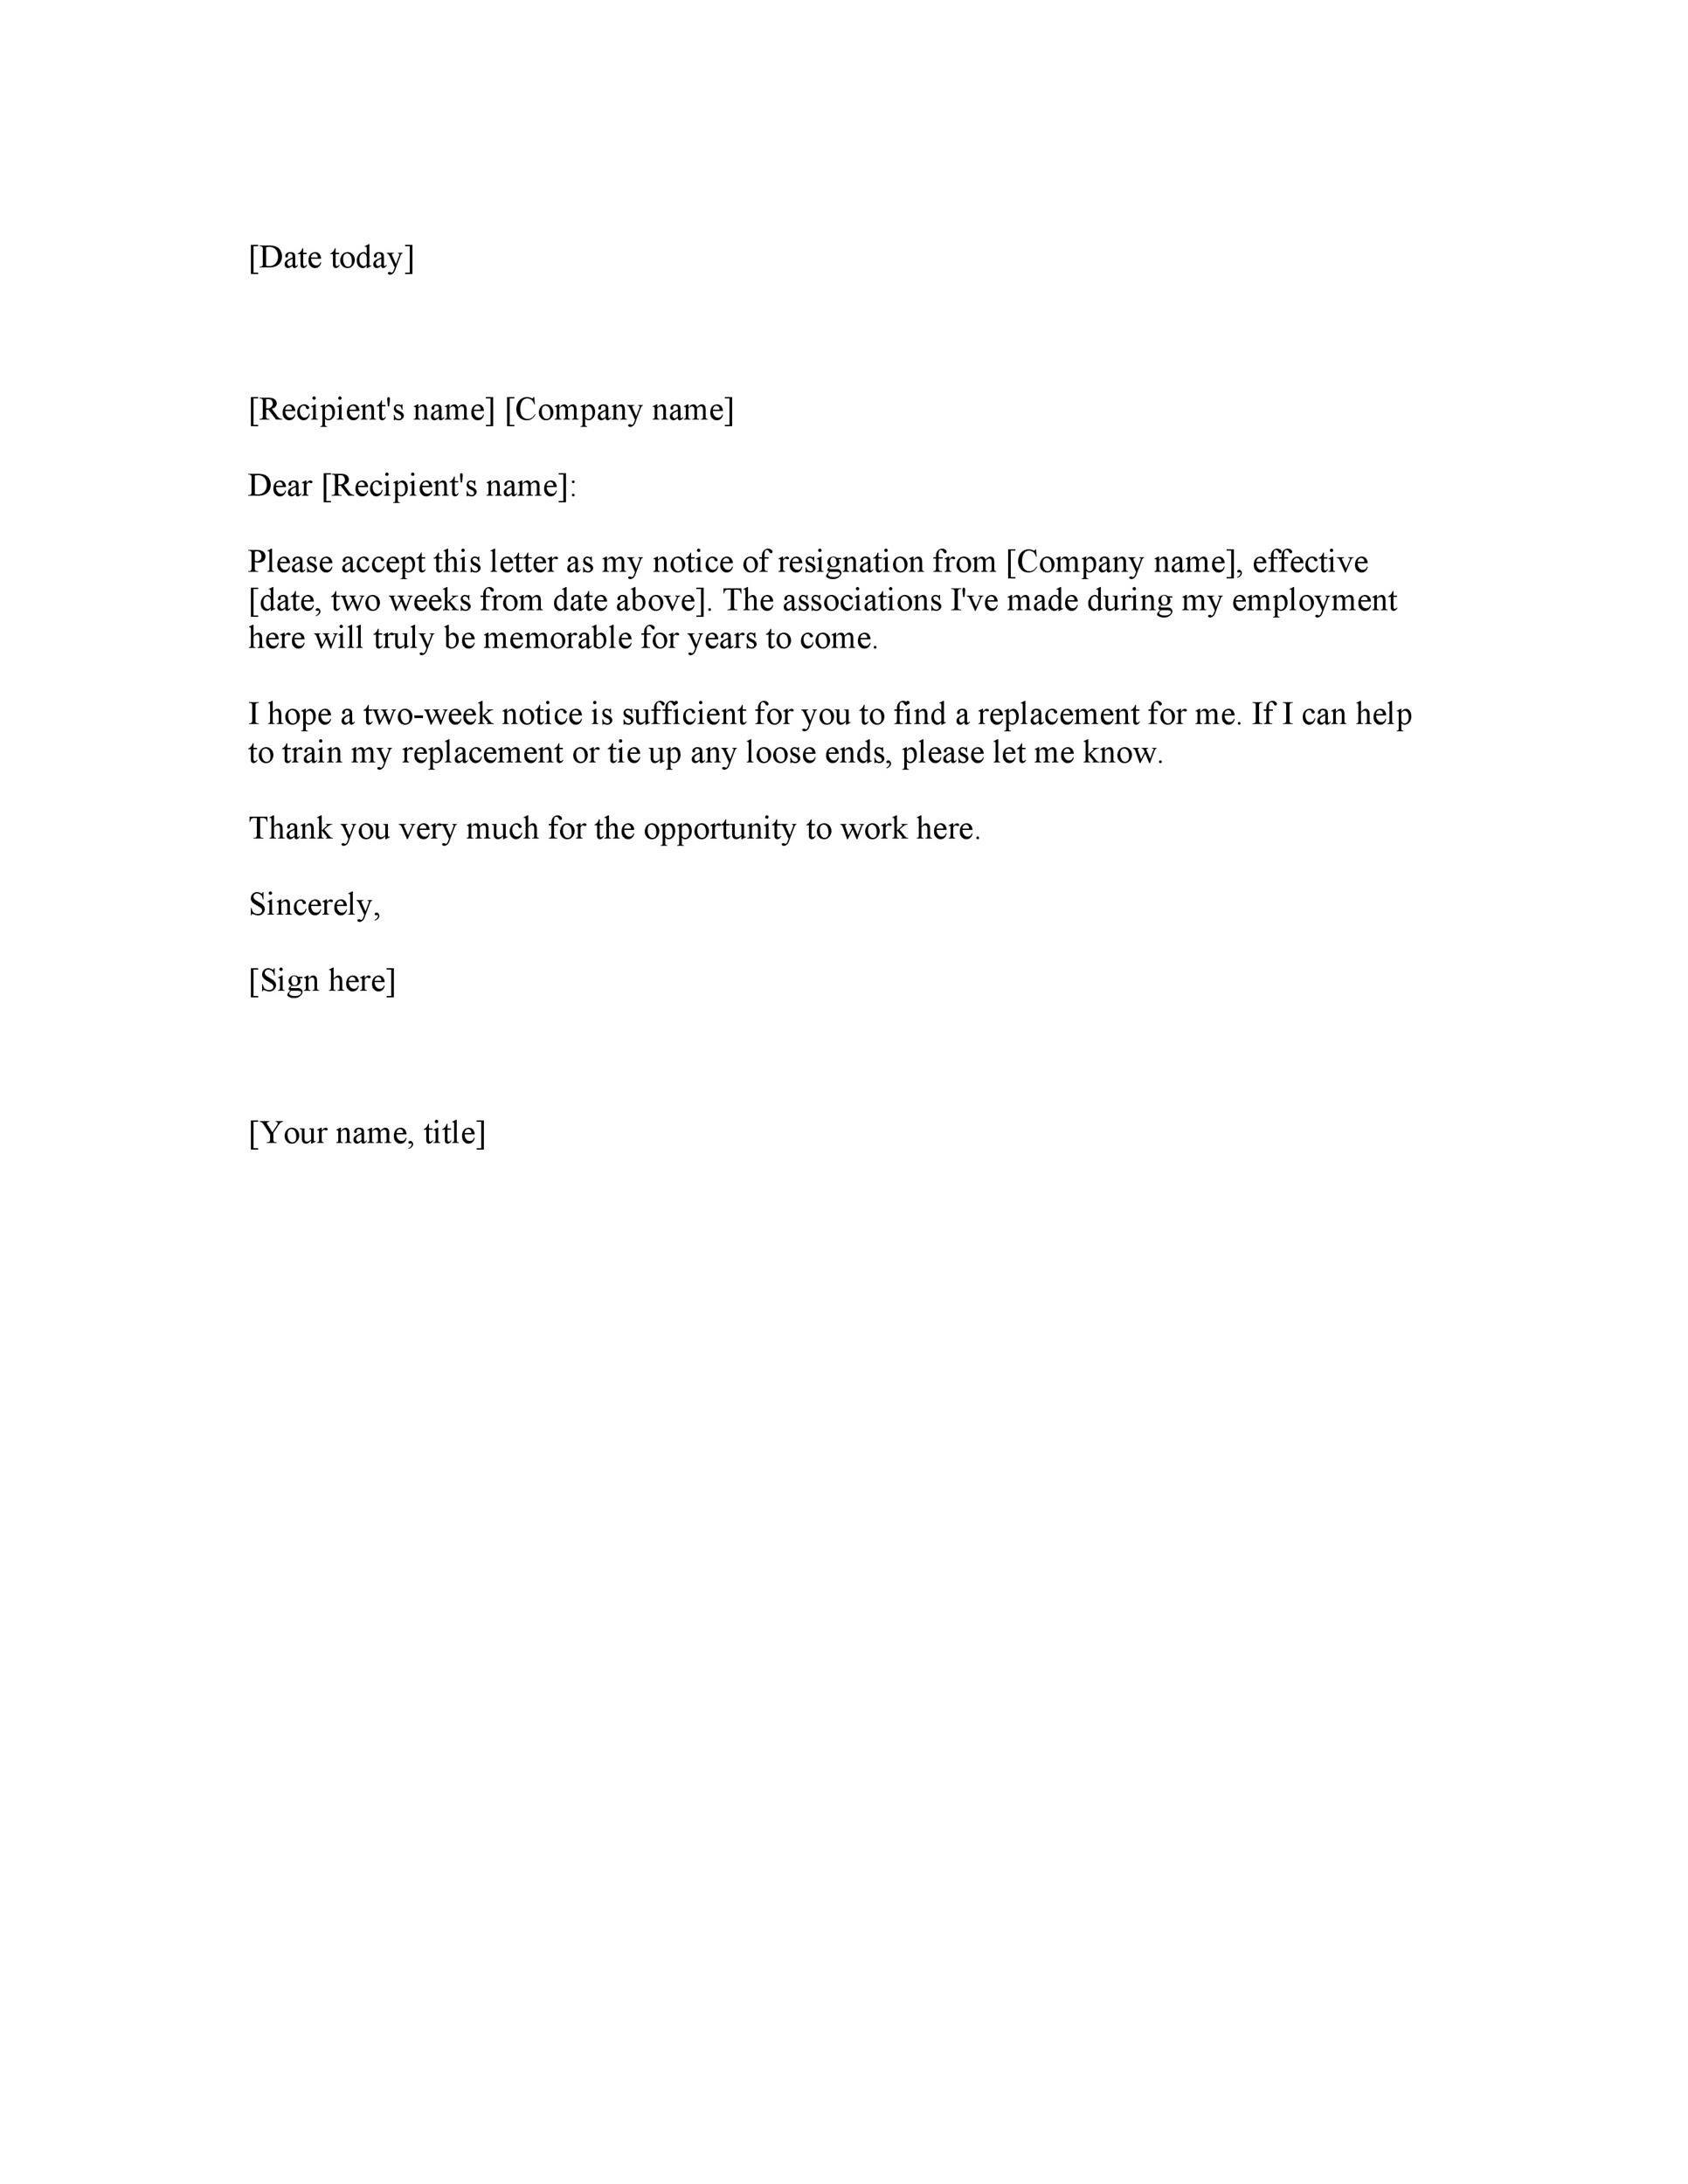 Formal Resignation Letter With 2 Weeks Notice from templatelab.com